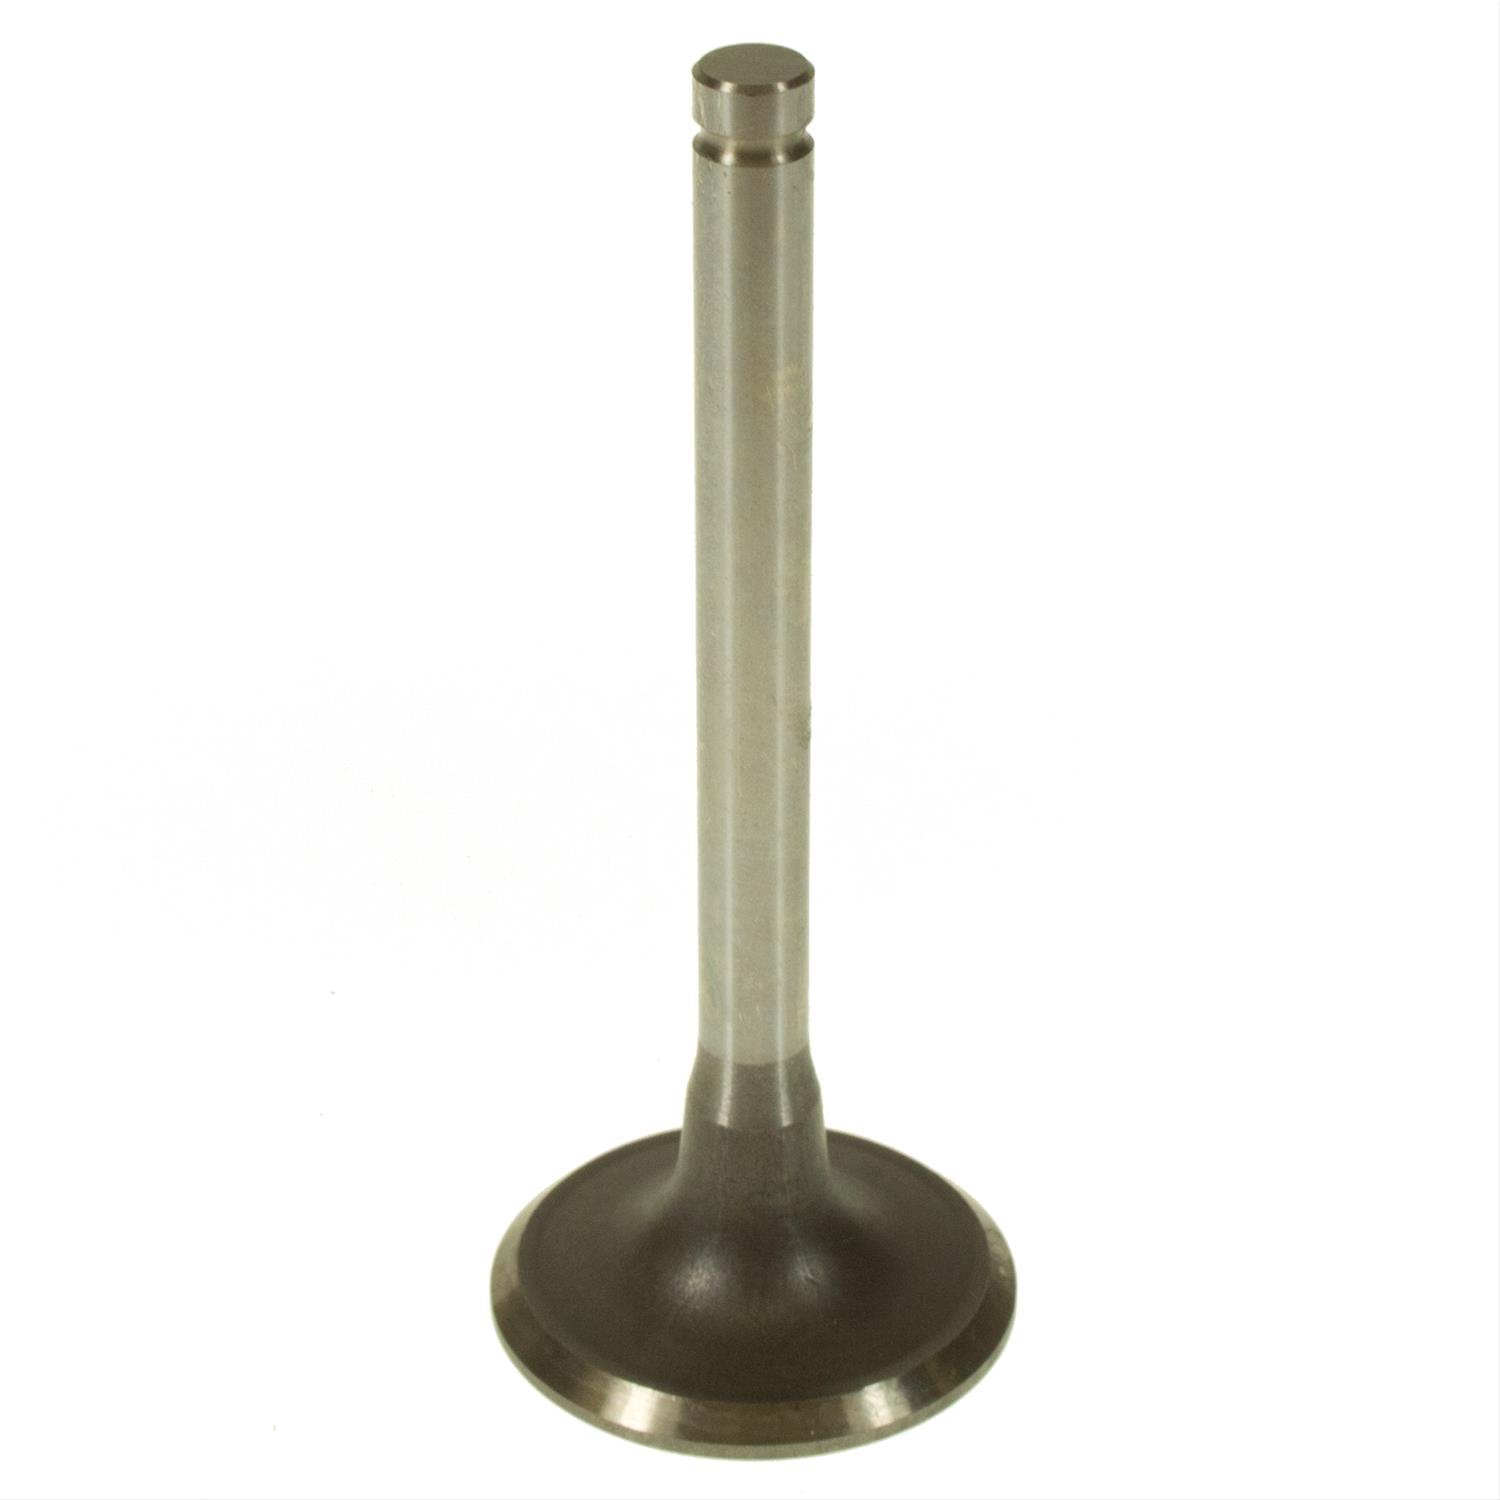 Intake Valve for Select 1976-1987 GM Models with 1.4L & 1.6L Engines